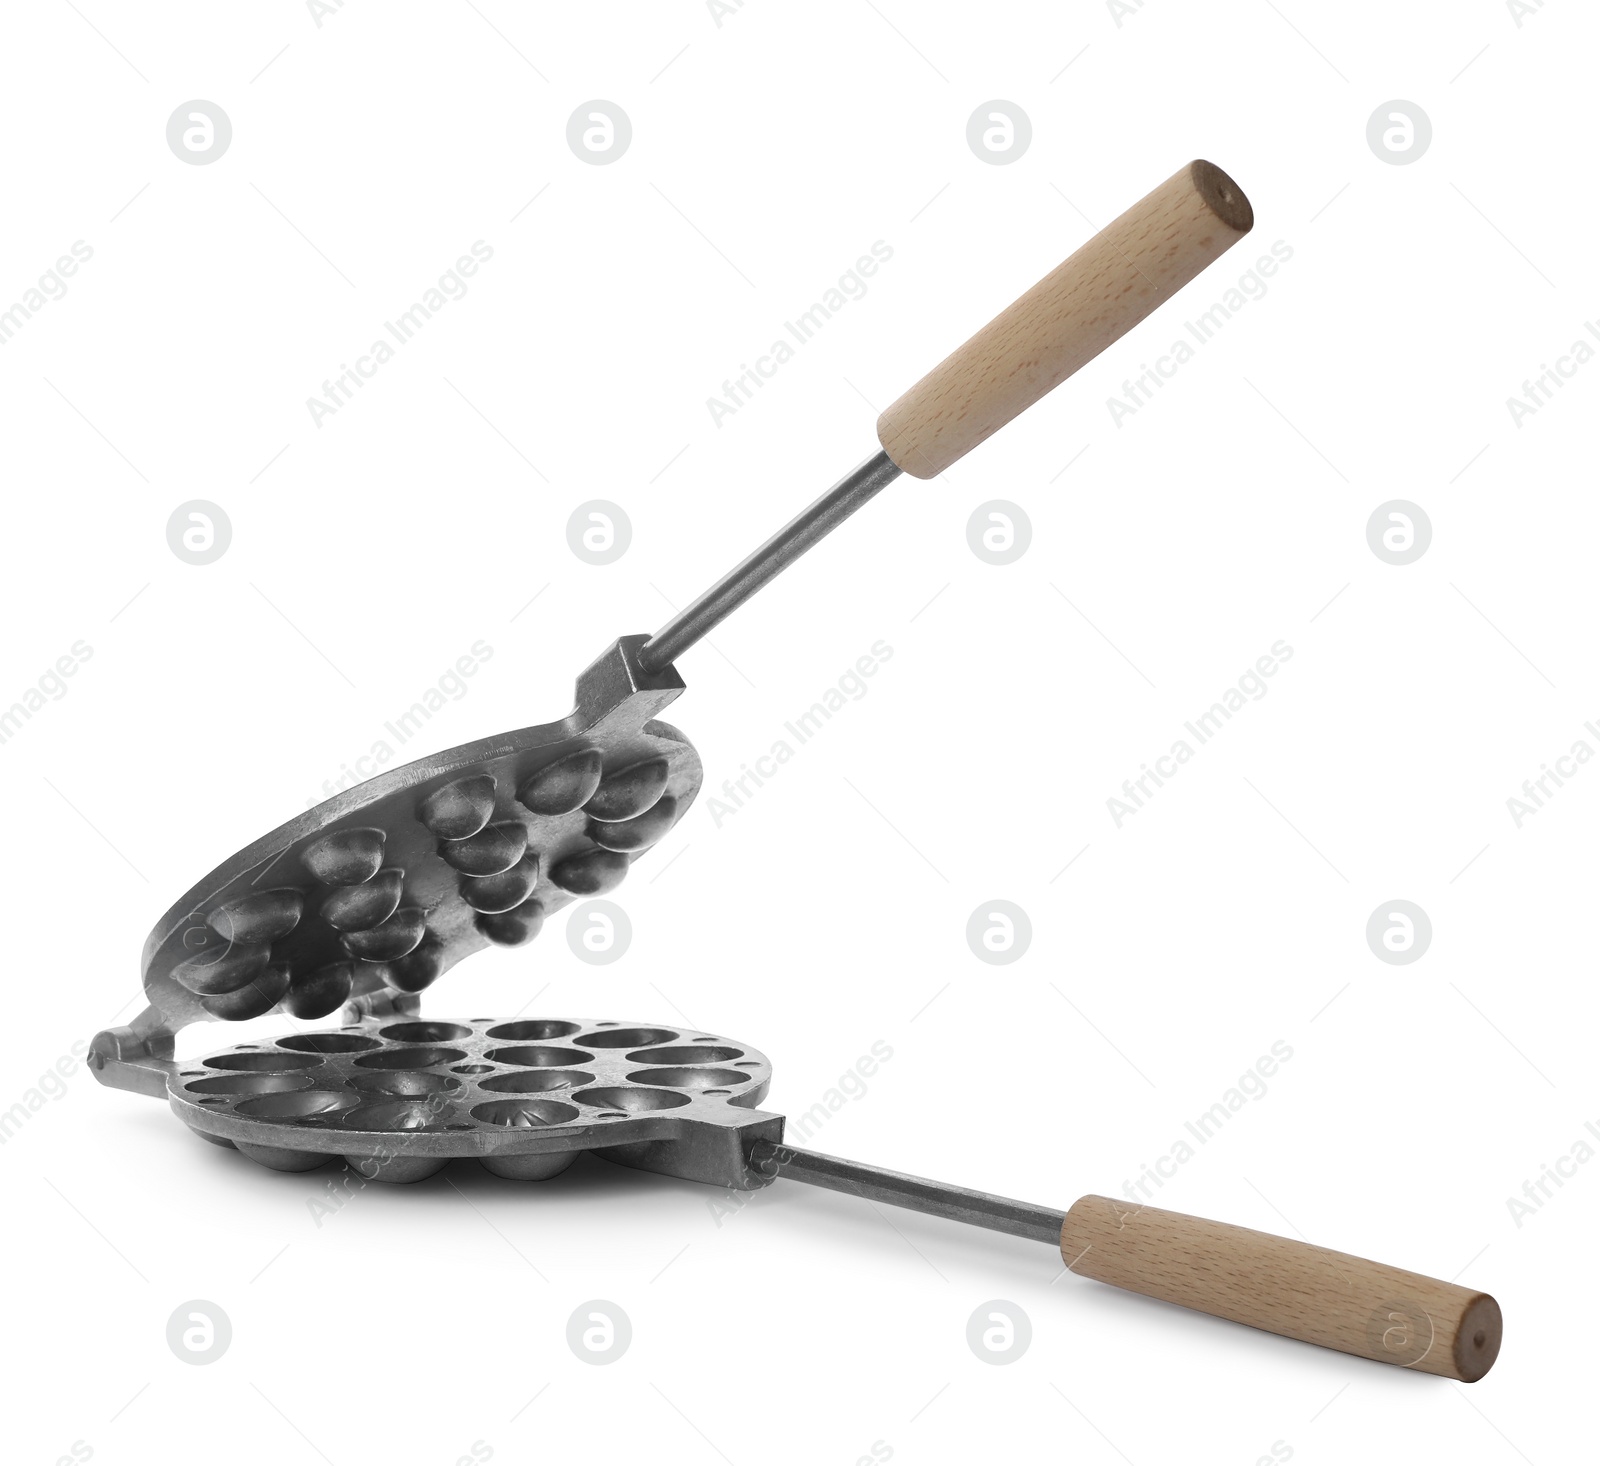 Photo of Walnut cookie mold with wooden handle isolated on white